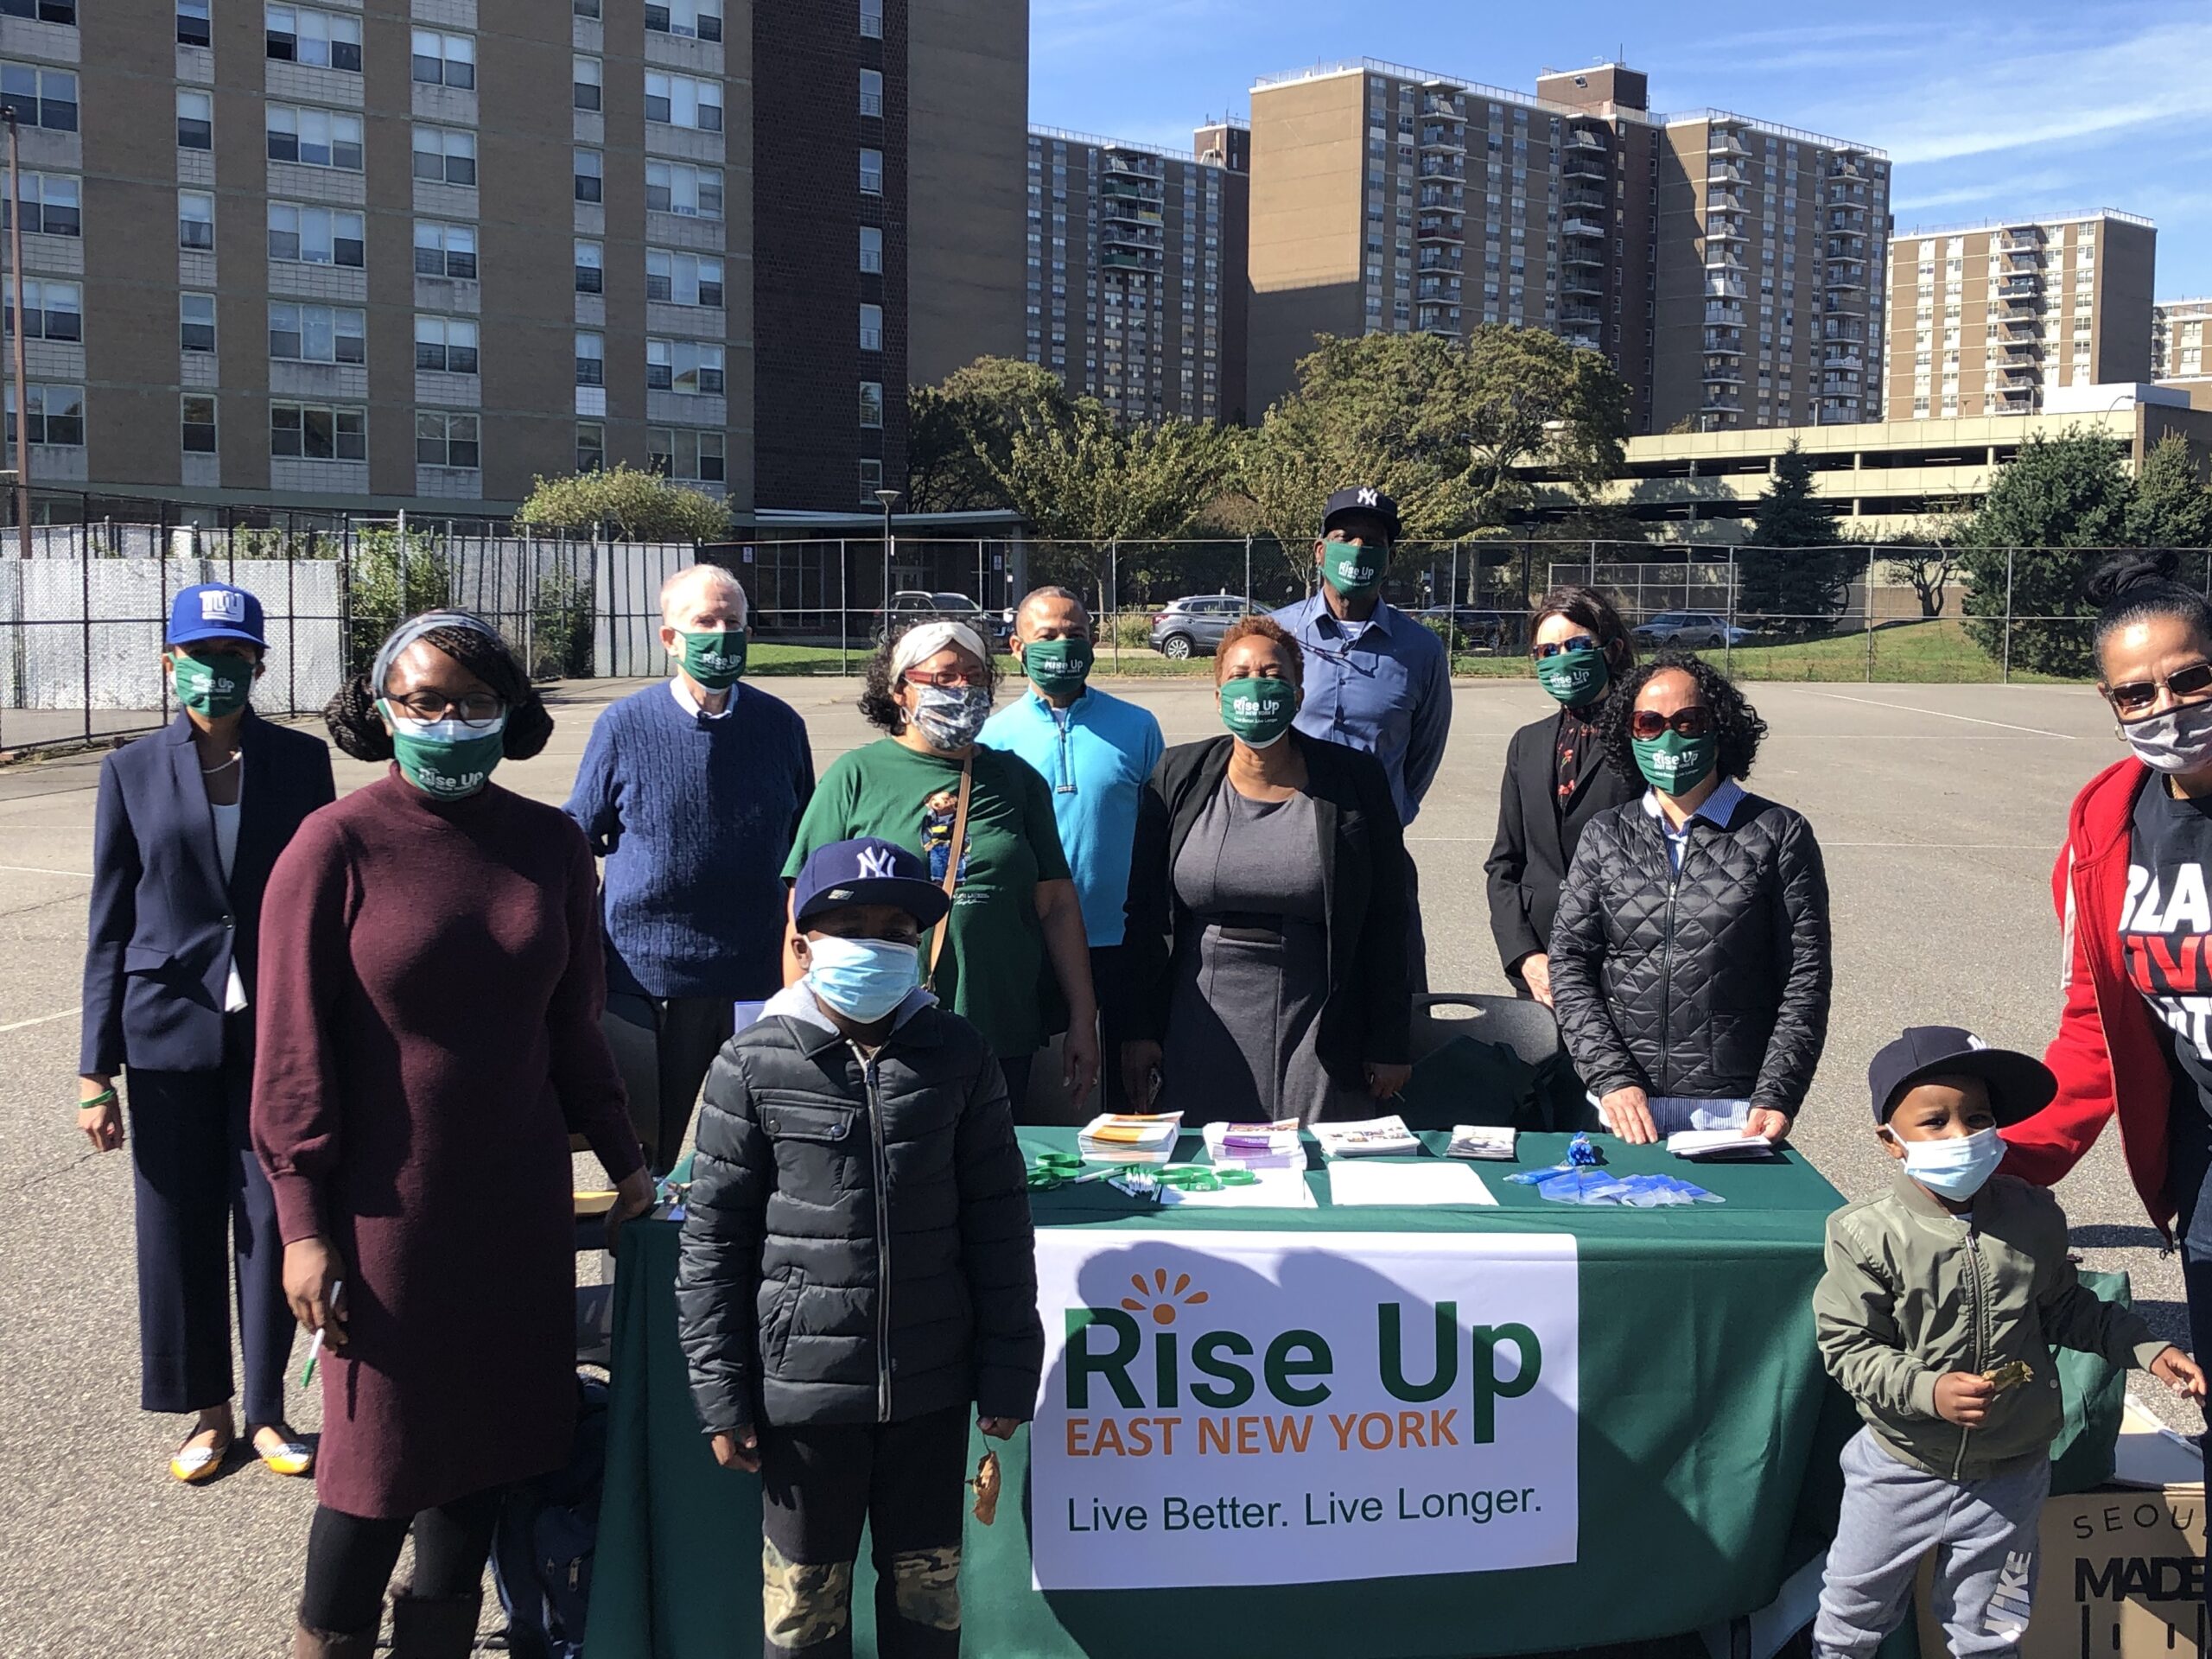 Press Release: Dreyfus Health Policy and Research Center Announces the Launch of the ‘Rise Up East New York’ Campaign to Address Rising Chronic Illness Rates